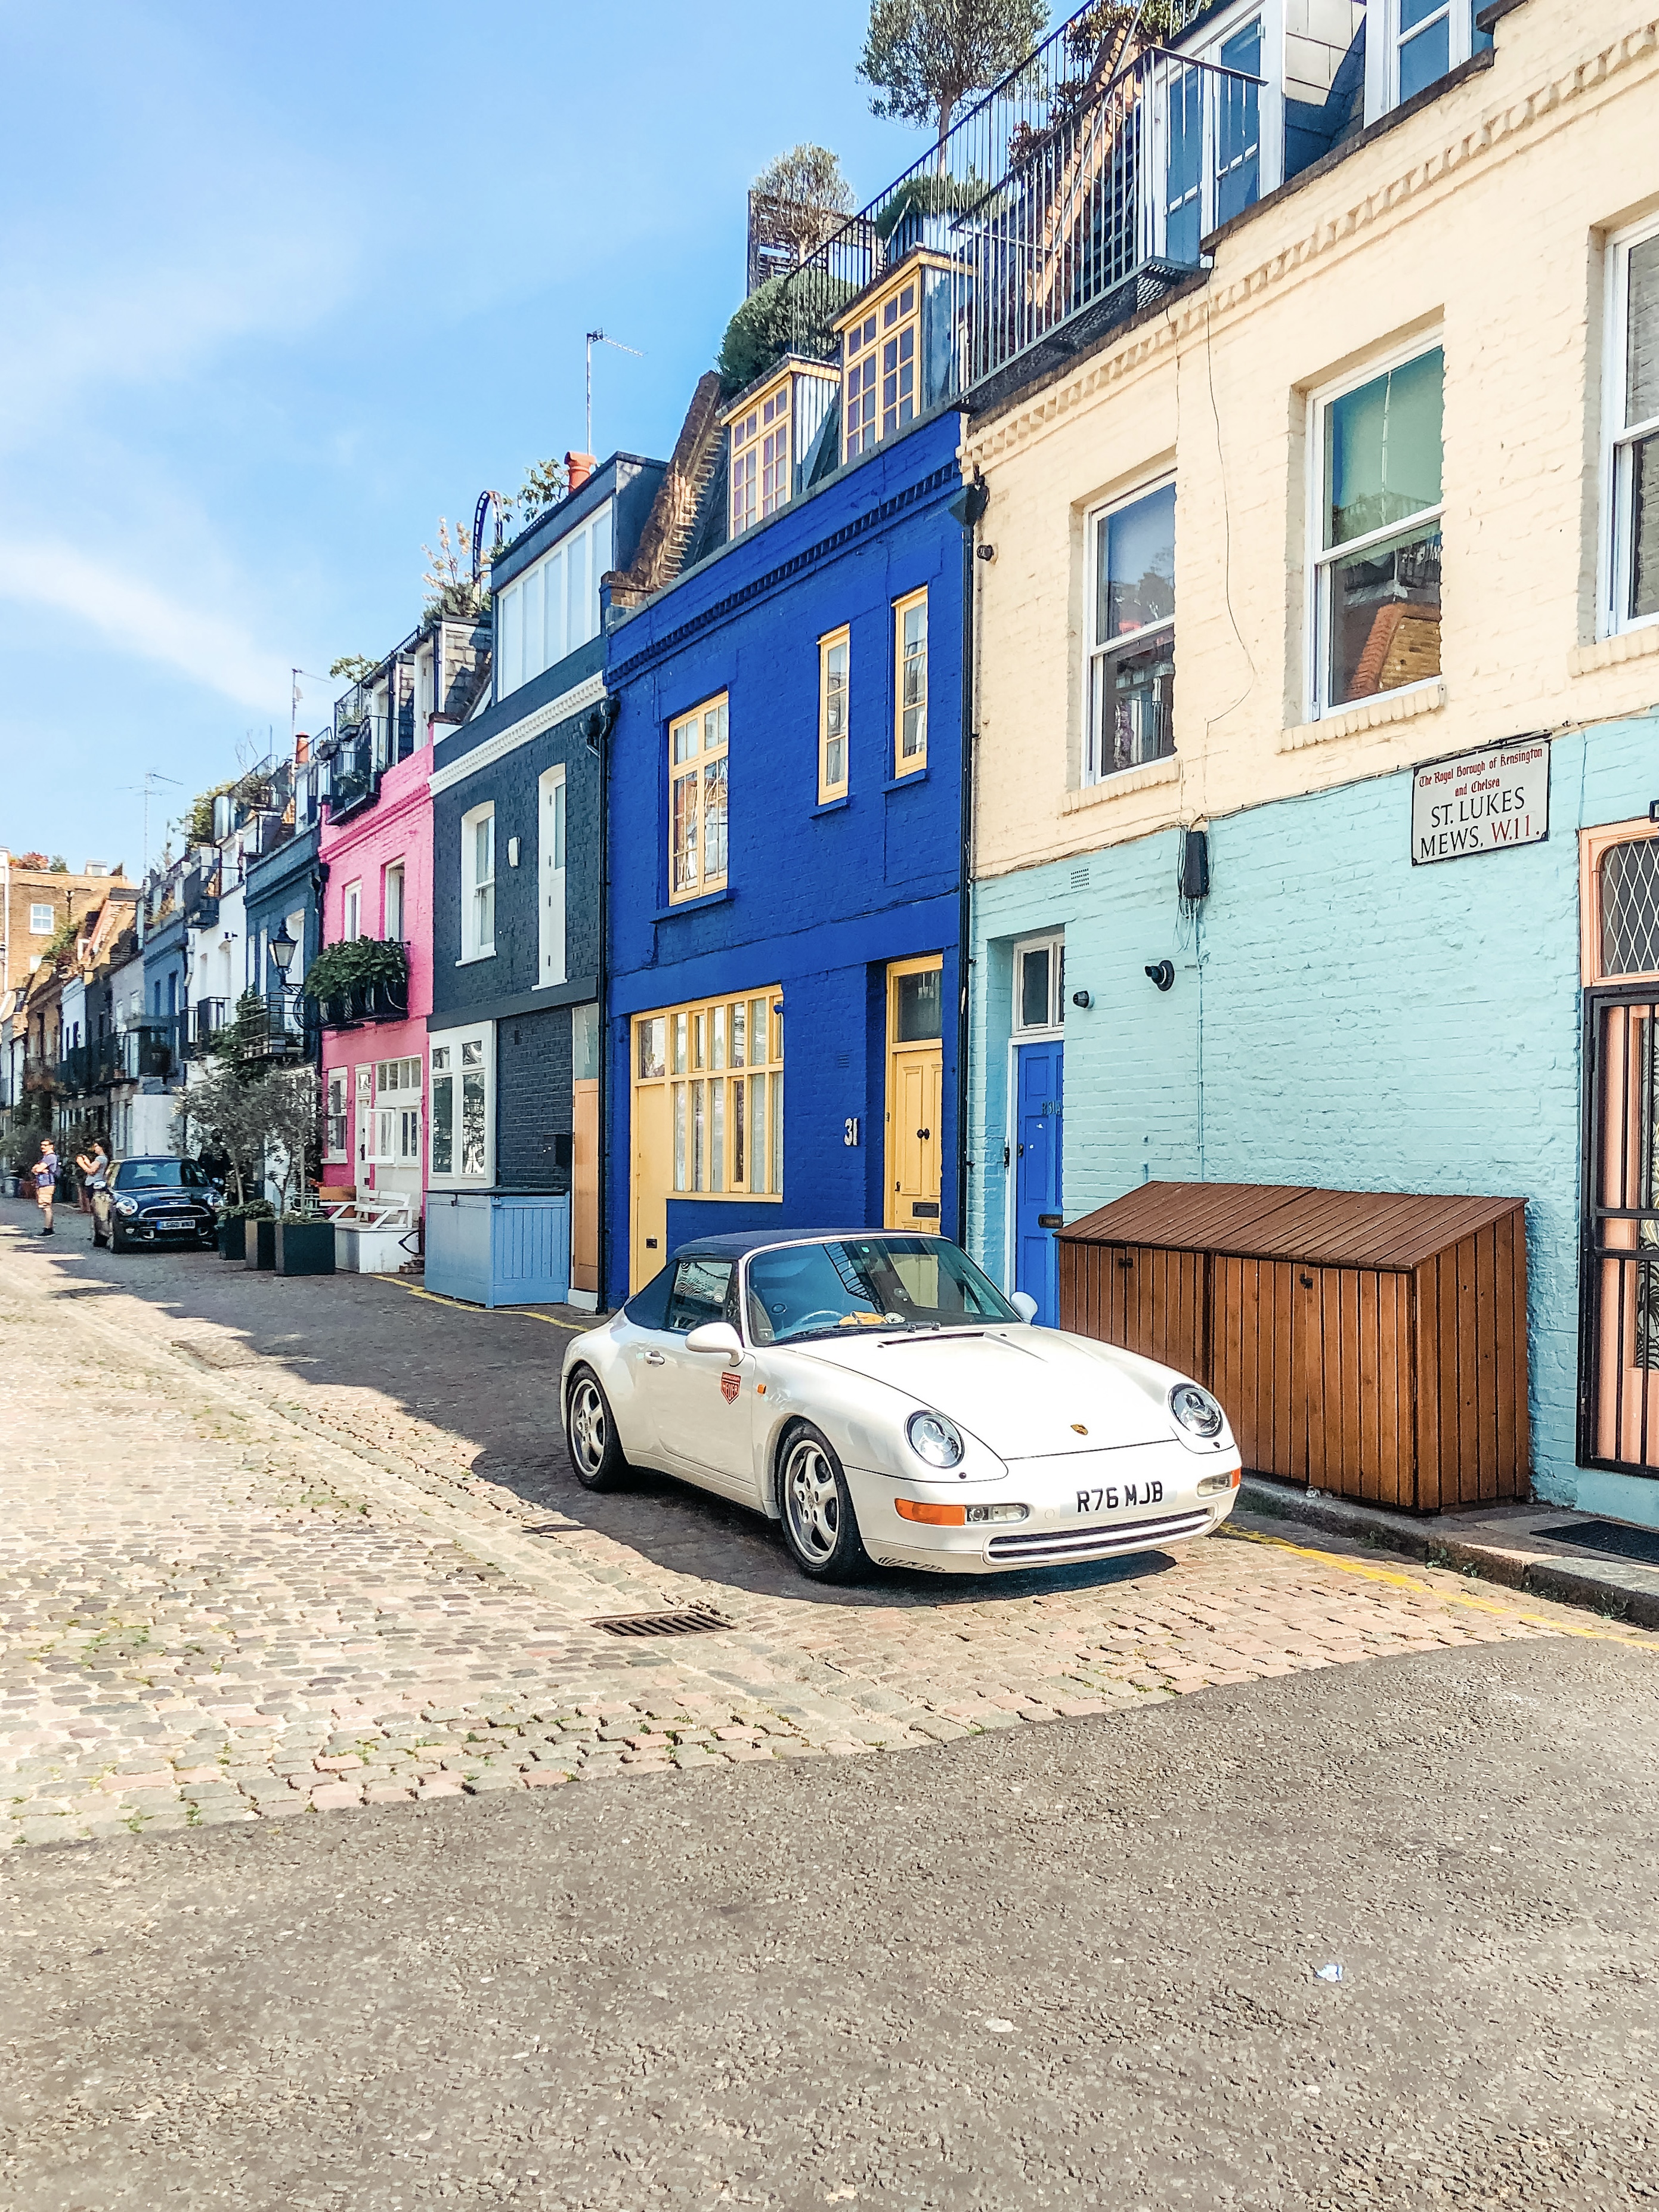 St. Lukes Mews- things to do in Notting Hill